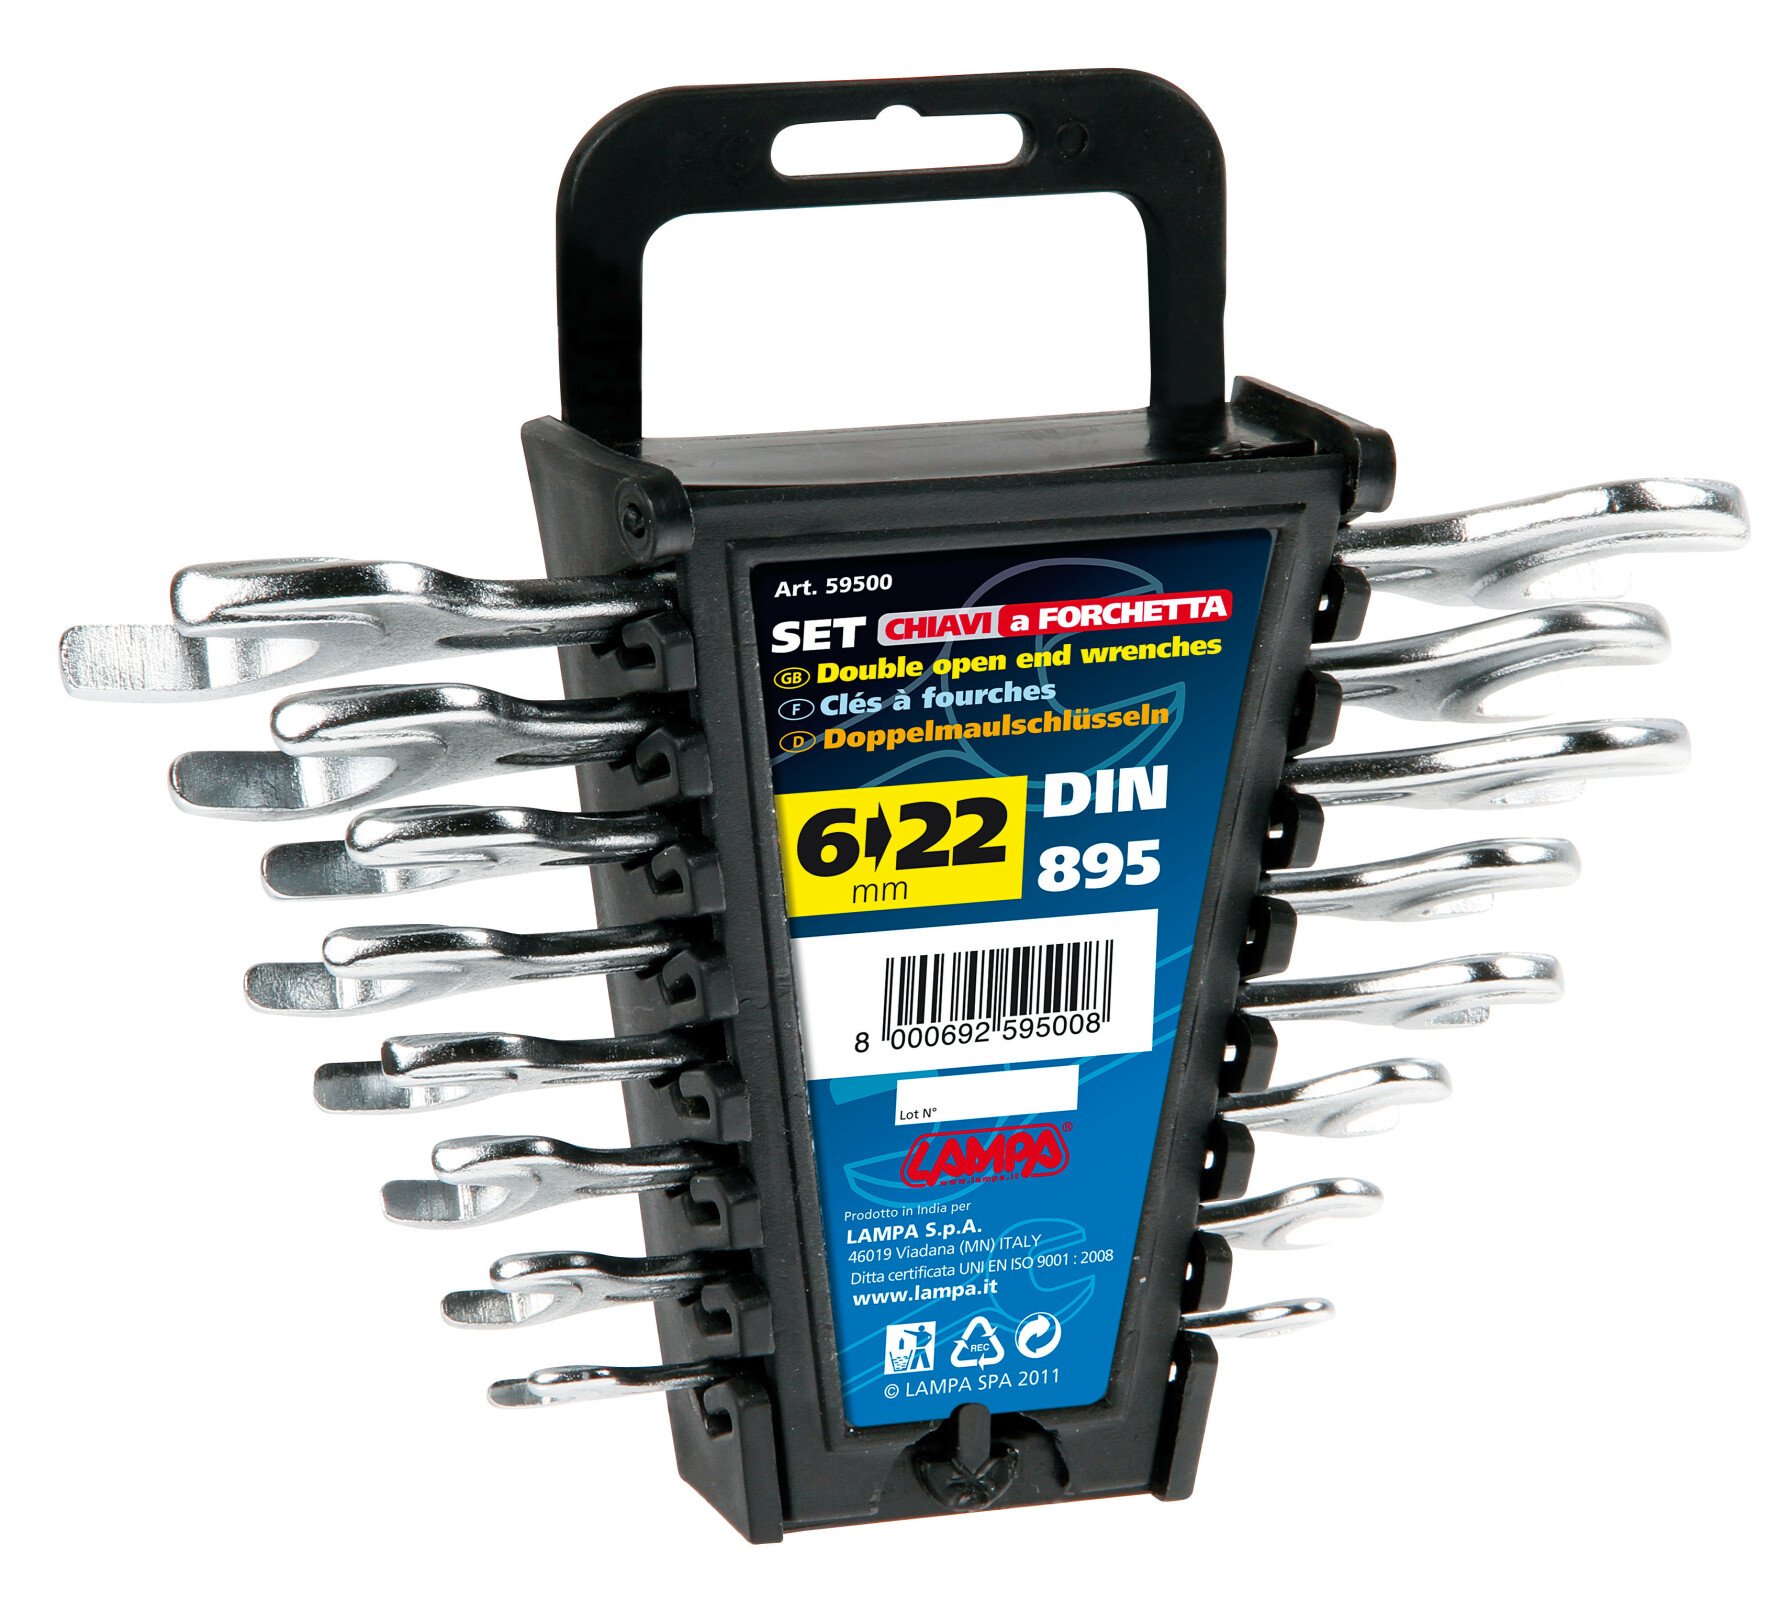 Set 8 double open end wrenches Lampa thumb